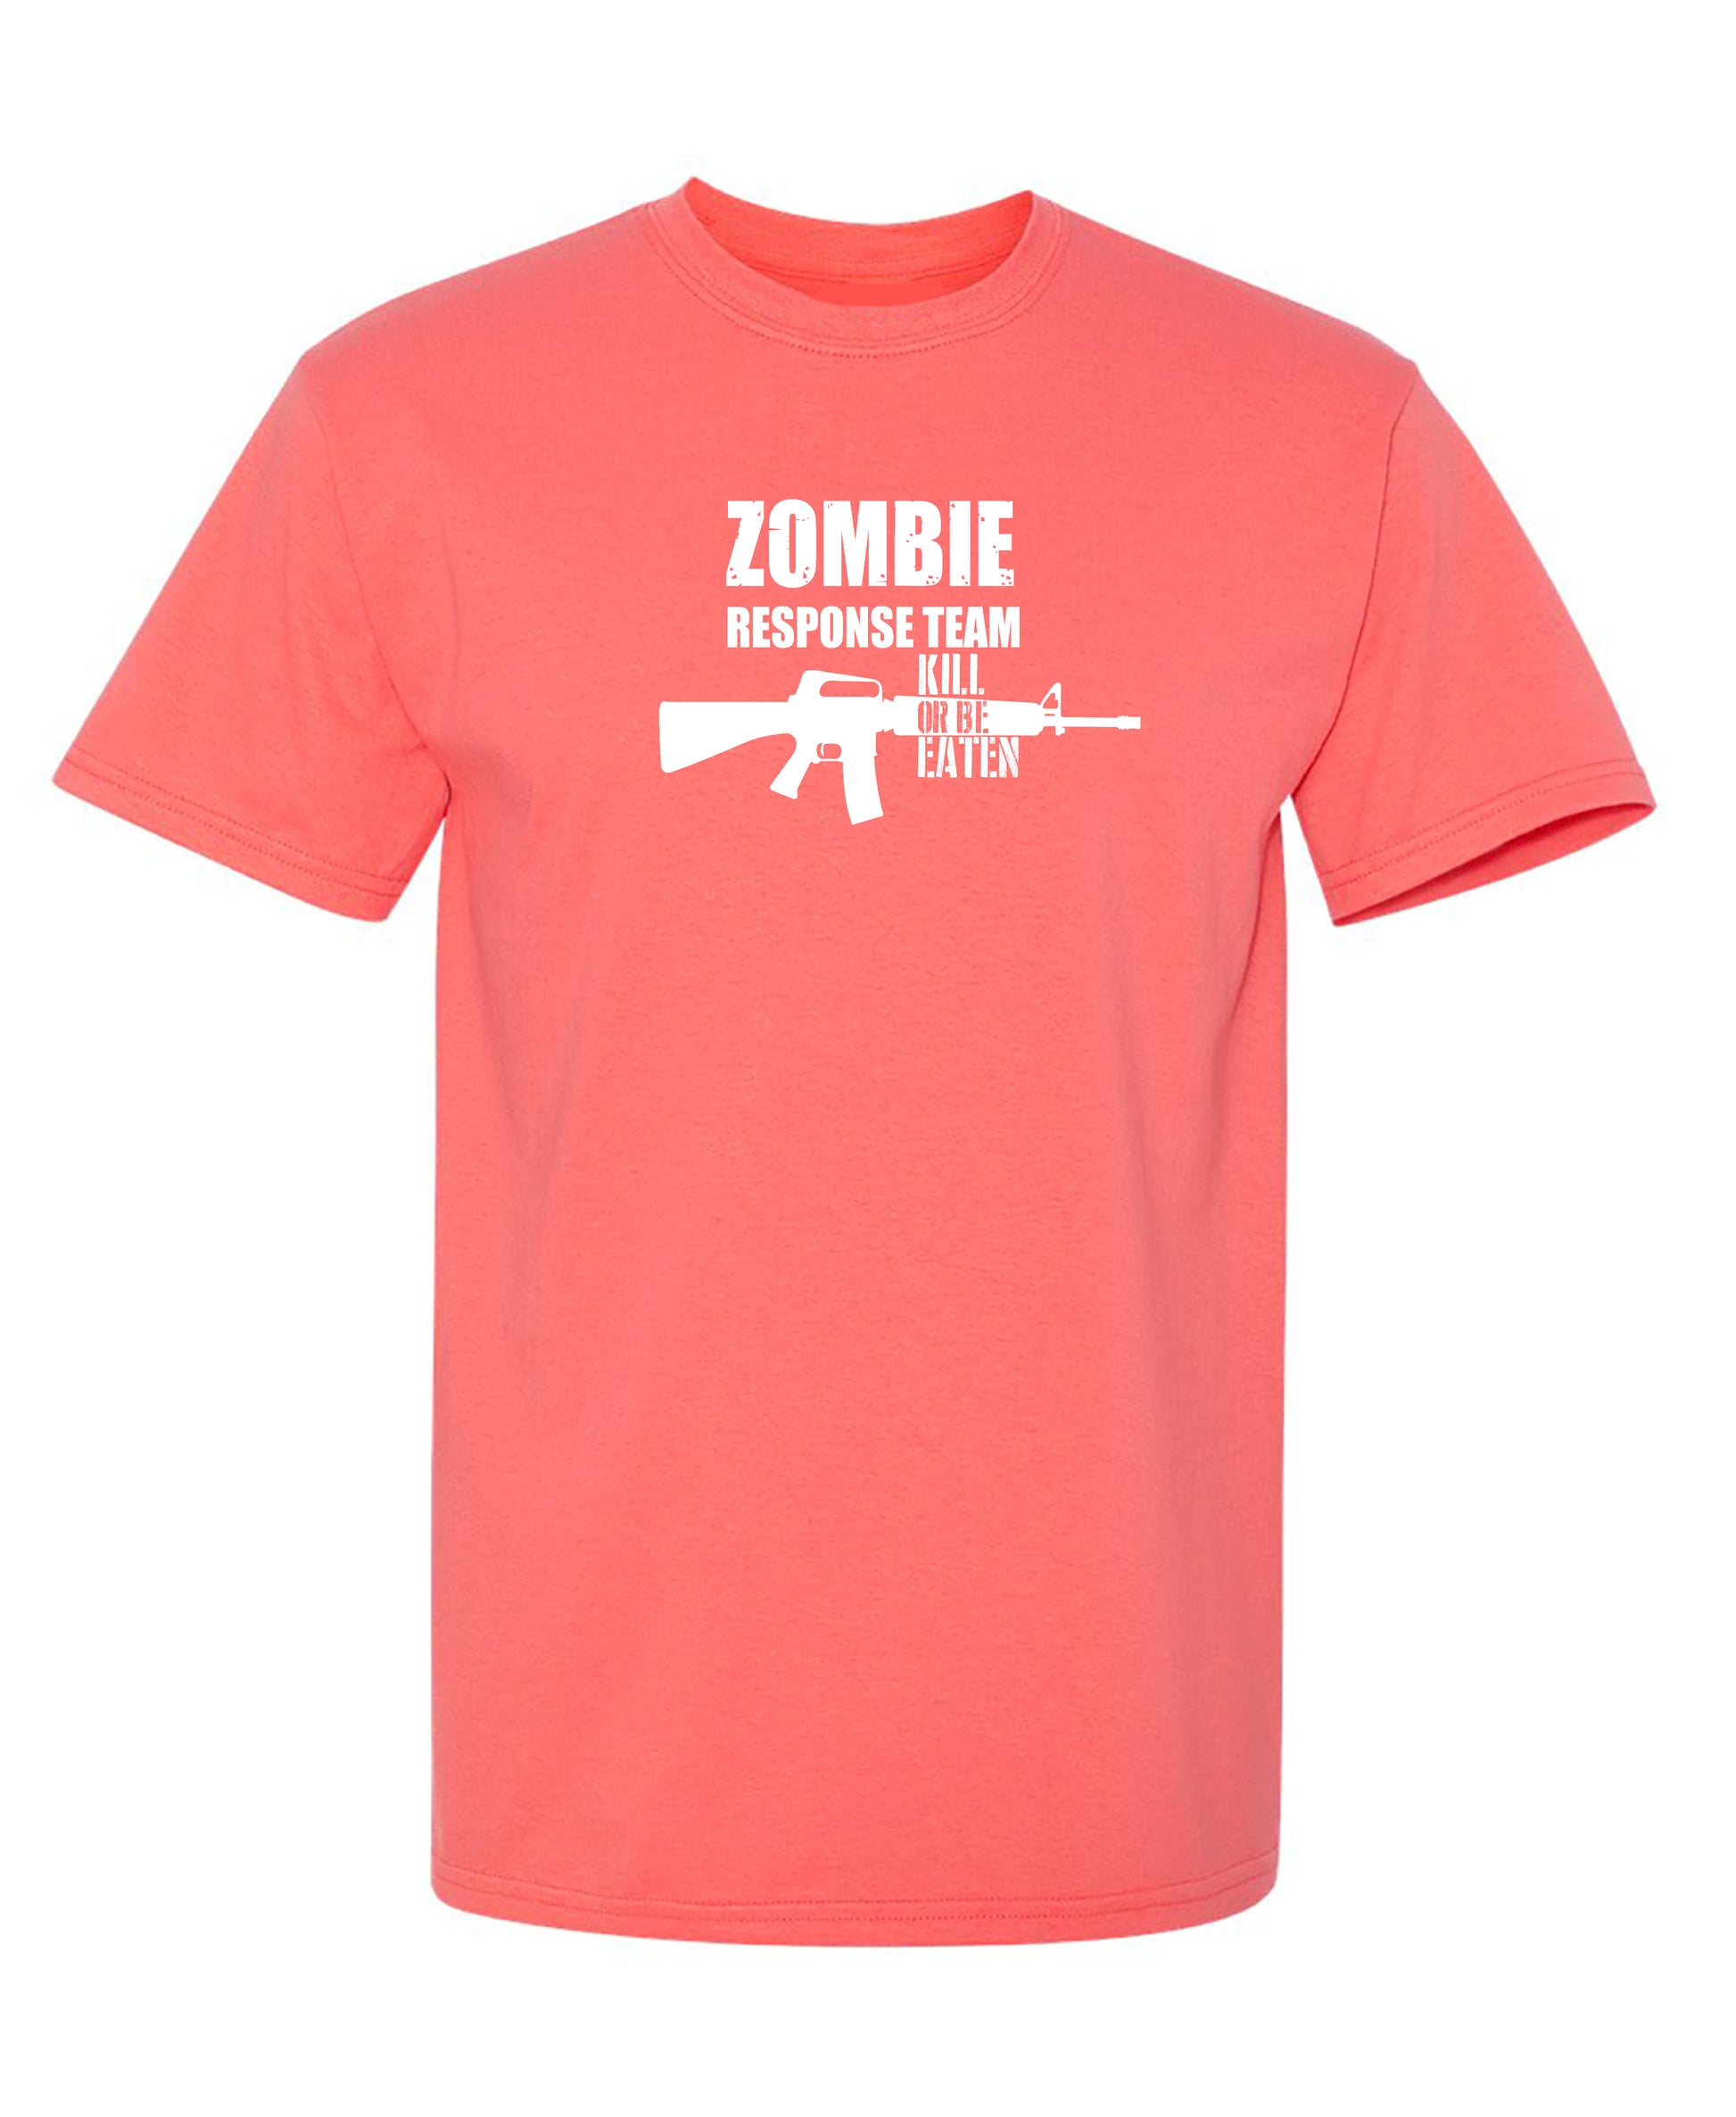 Zombie Response Team Kill Or Be Eaten, New - Funny T Shirts & Graphic Tees